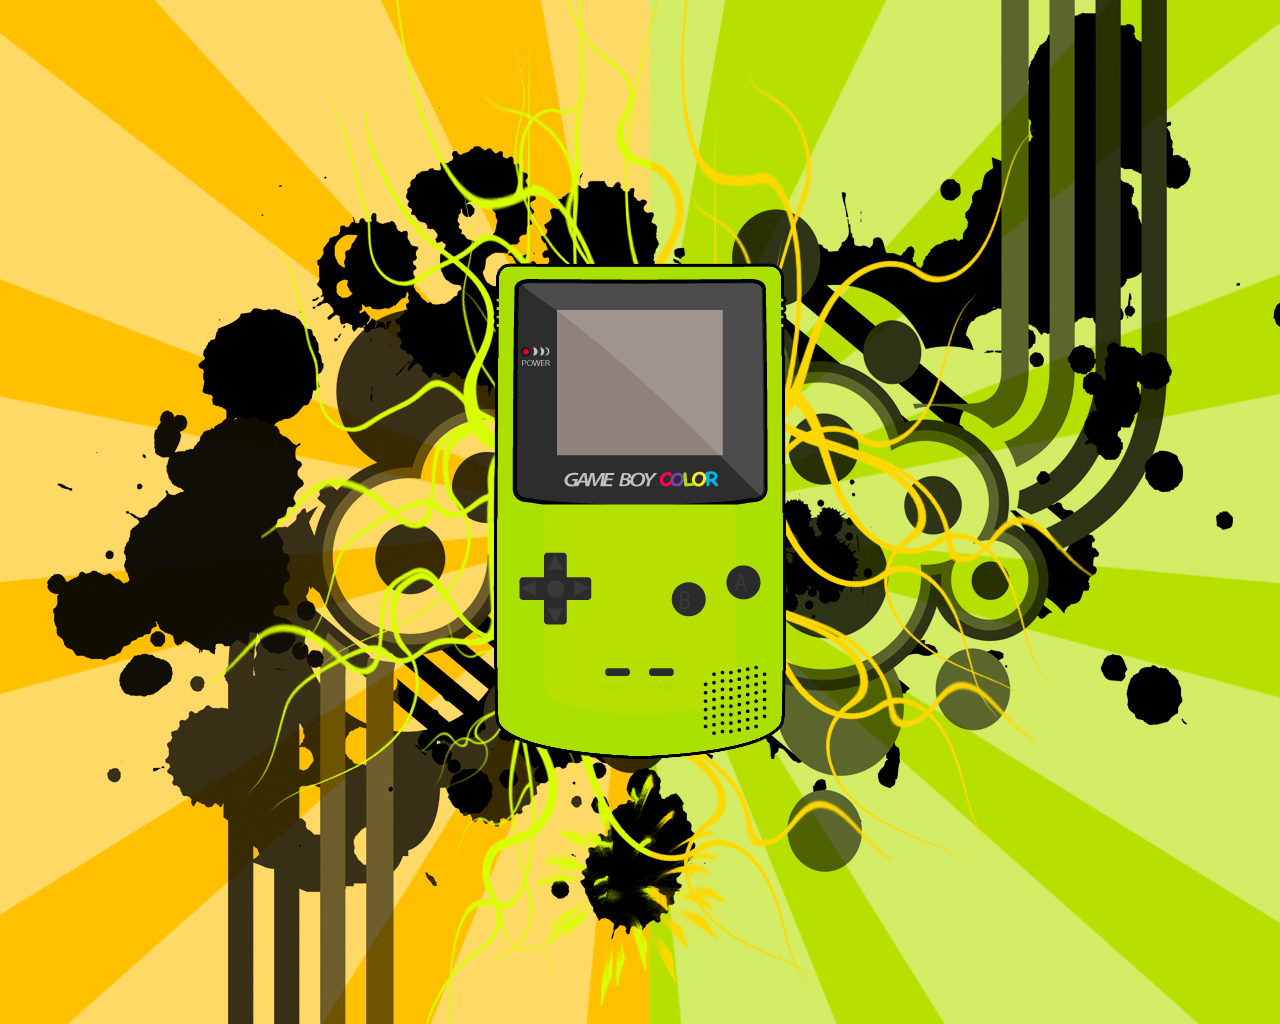 Gameboy Advance Wallpapers